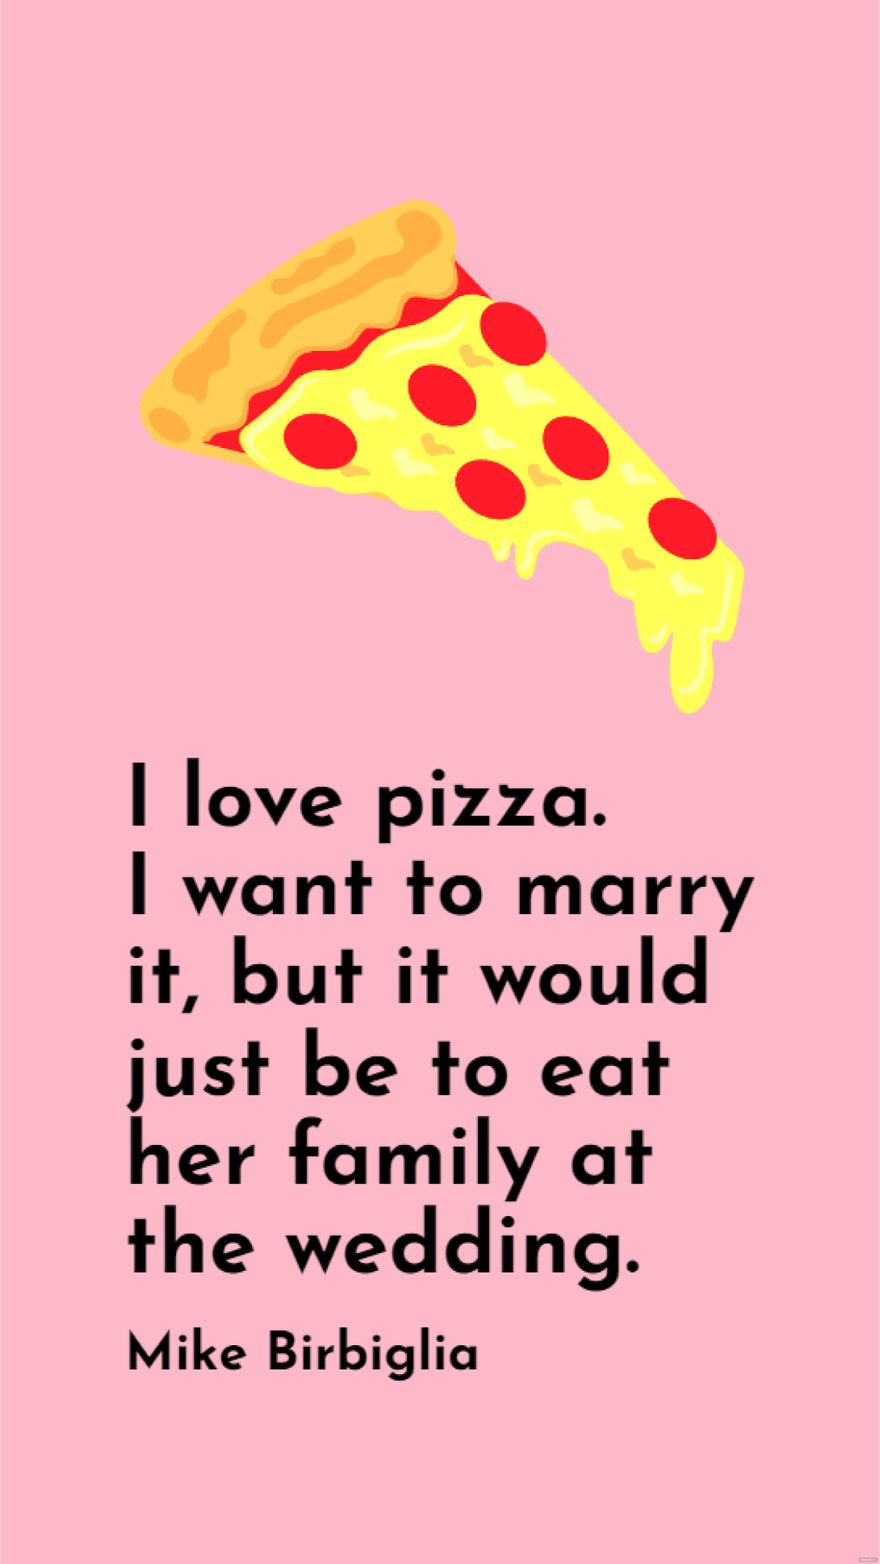 Free Mike Birbiglia - I love pizza. I want to marry it, but it would just be to eat her family at the wedding.